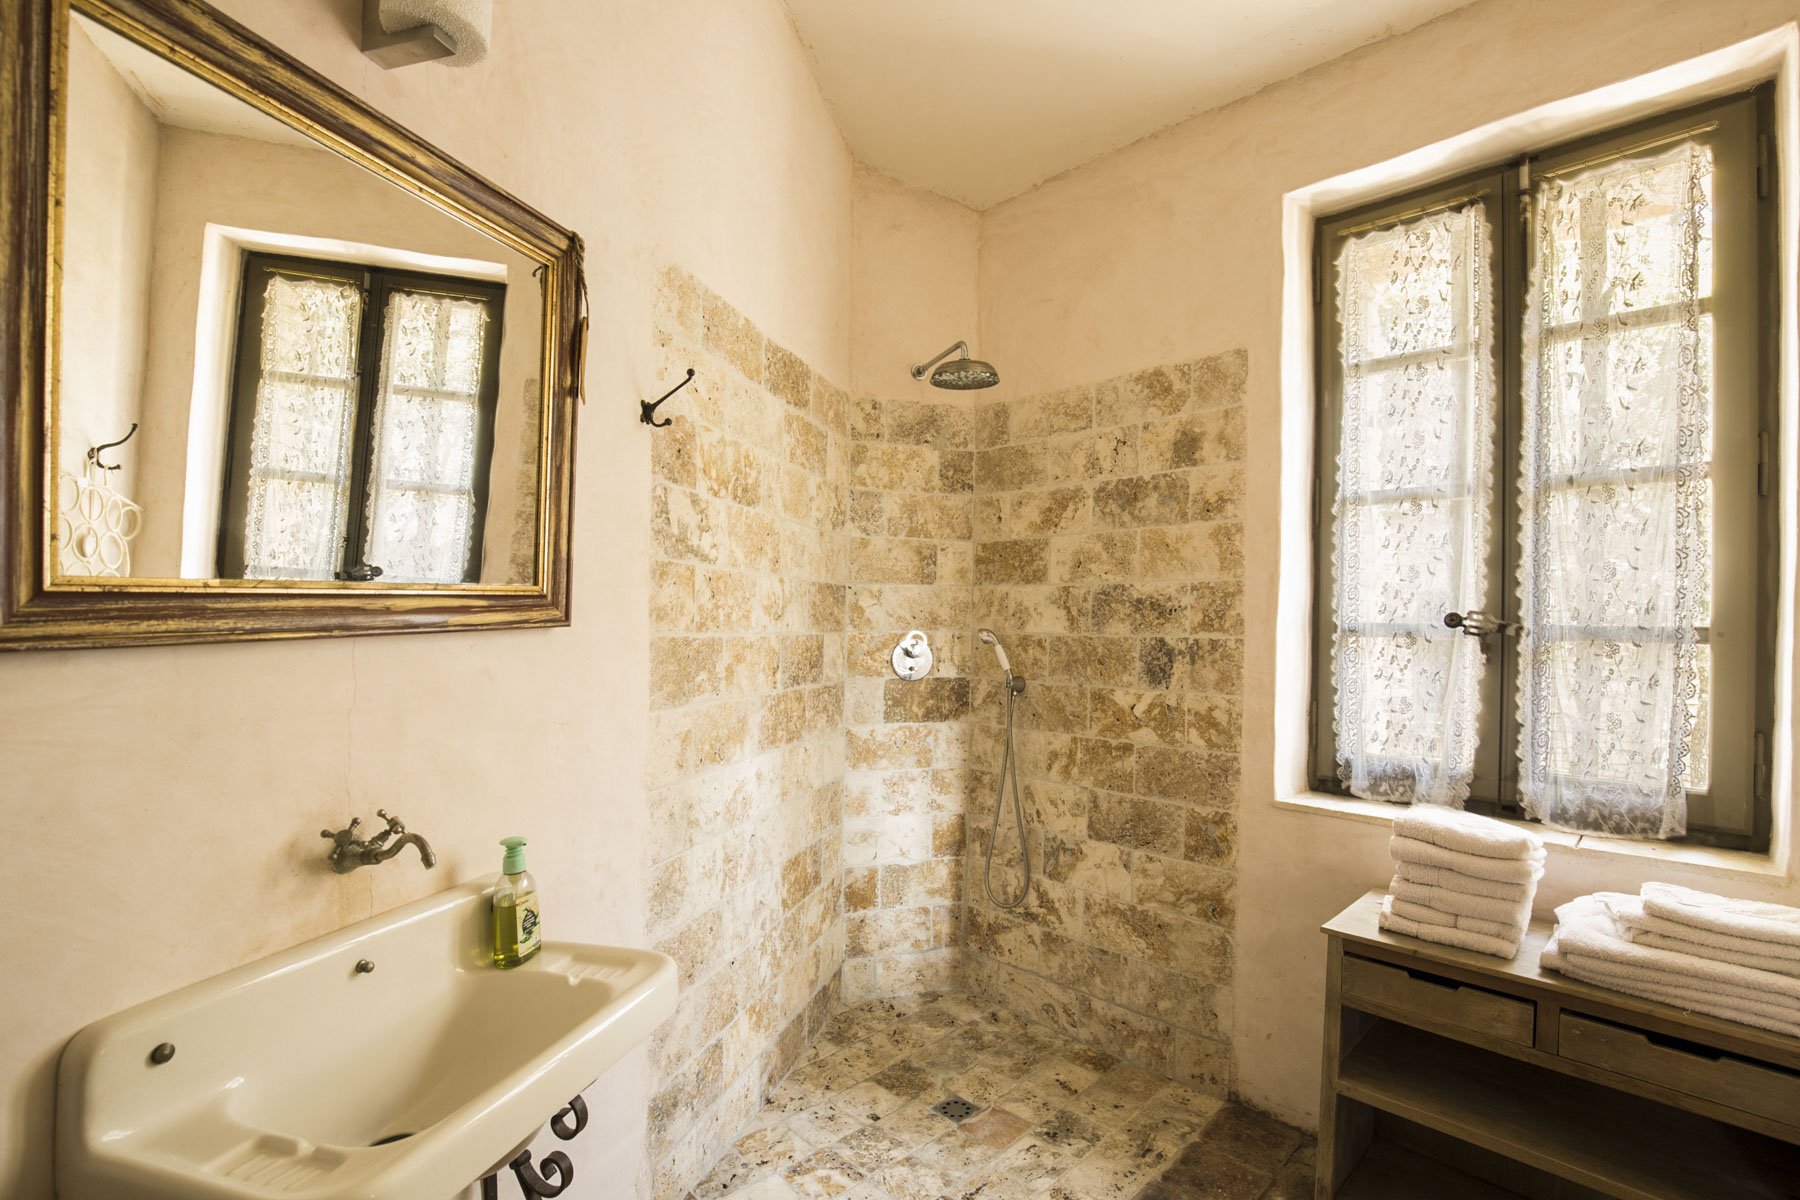 Francis York  Charming Stone House in the Provencal Village of Gordes, France  00004.jpg